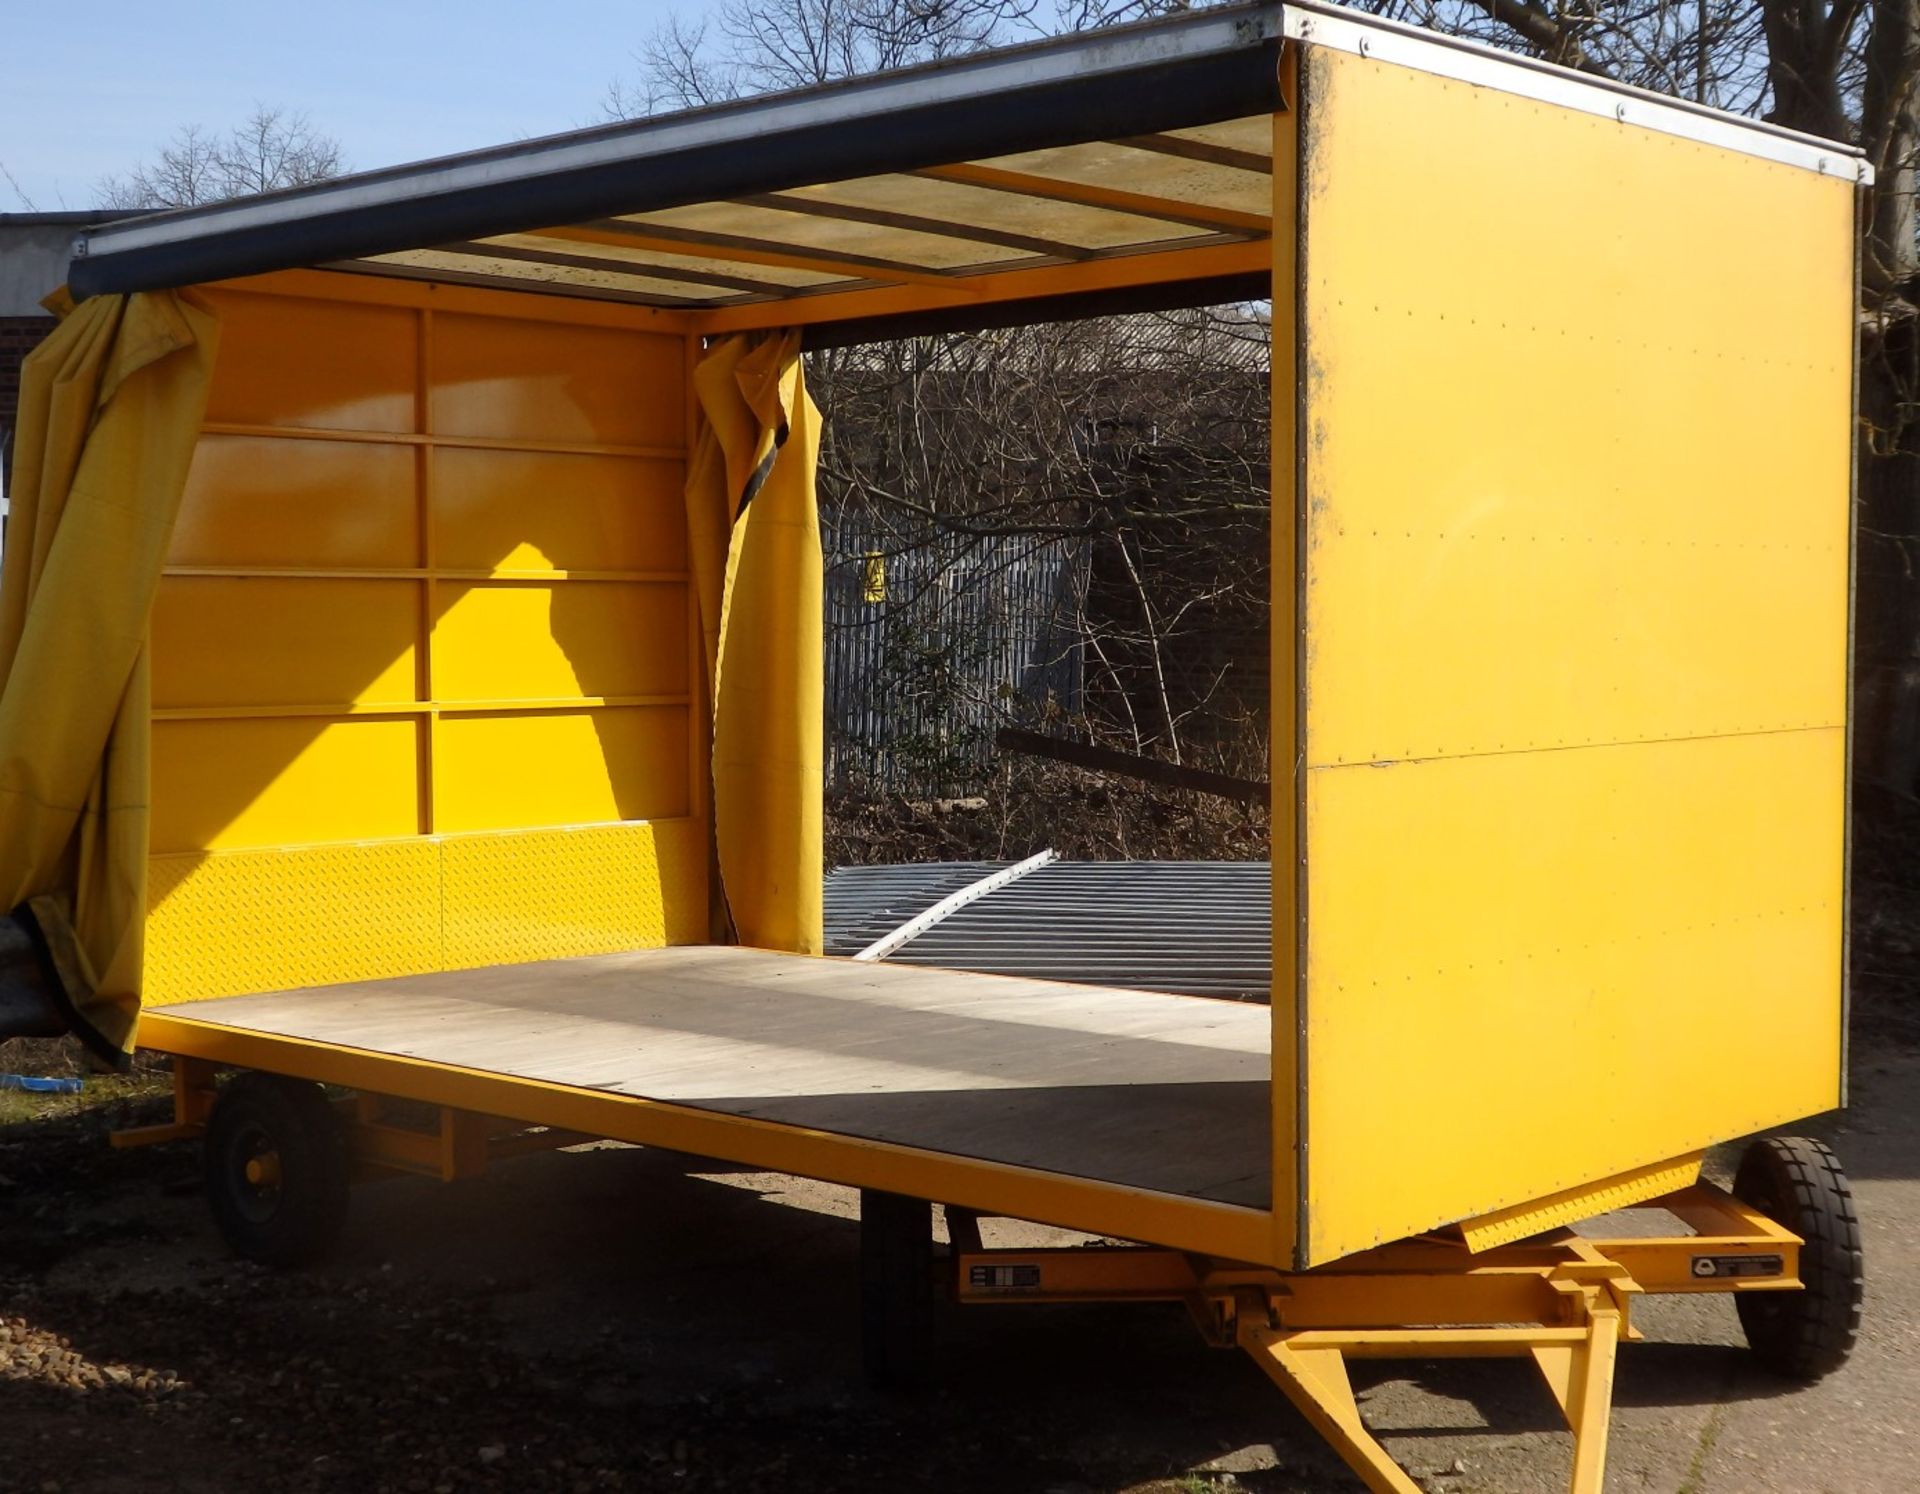 1 x Enclosed Curtain Sided Box Trailer With Turntable Steering - Alexander Trailers Model IP40ST - - Image 4 of 28